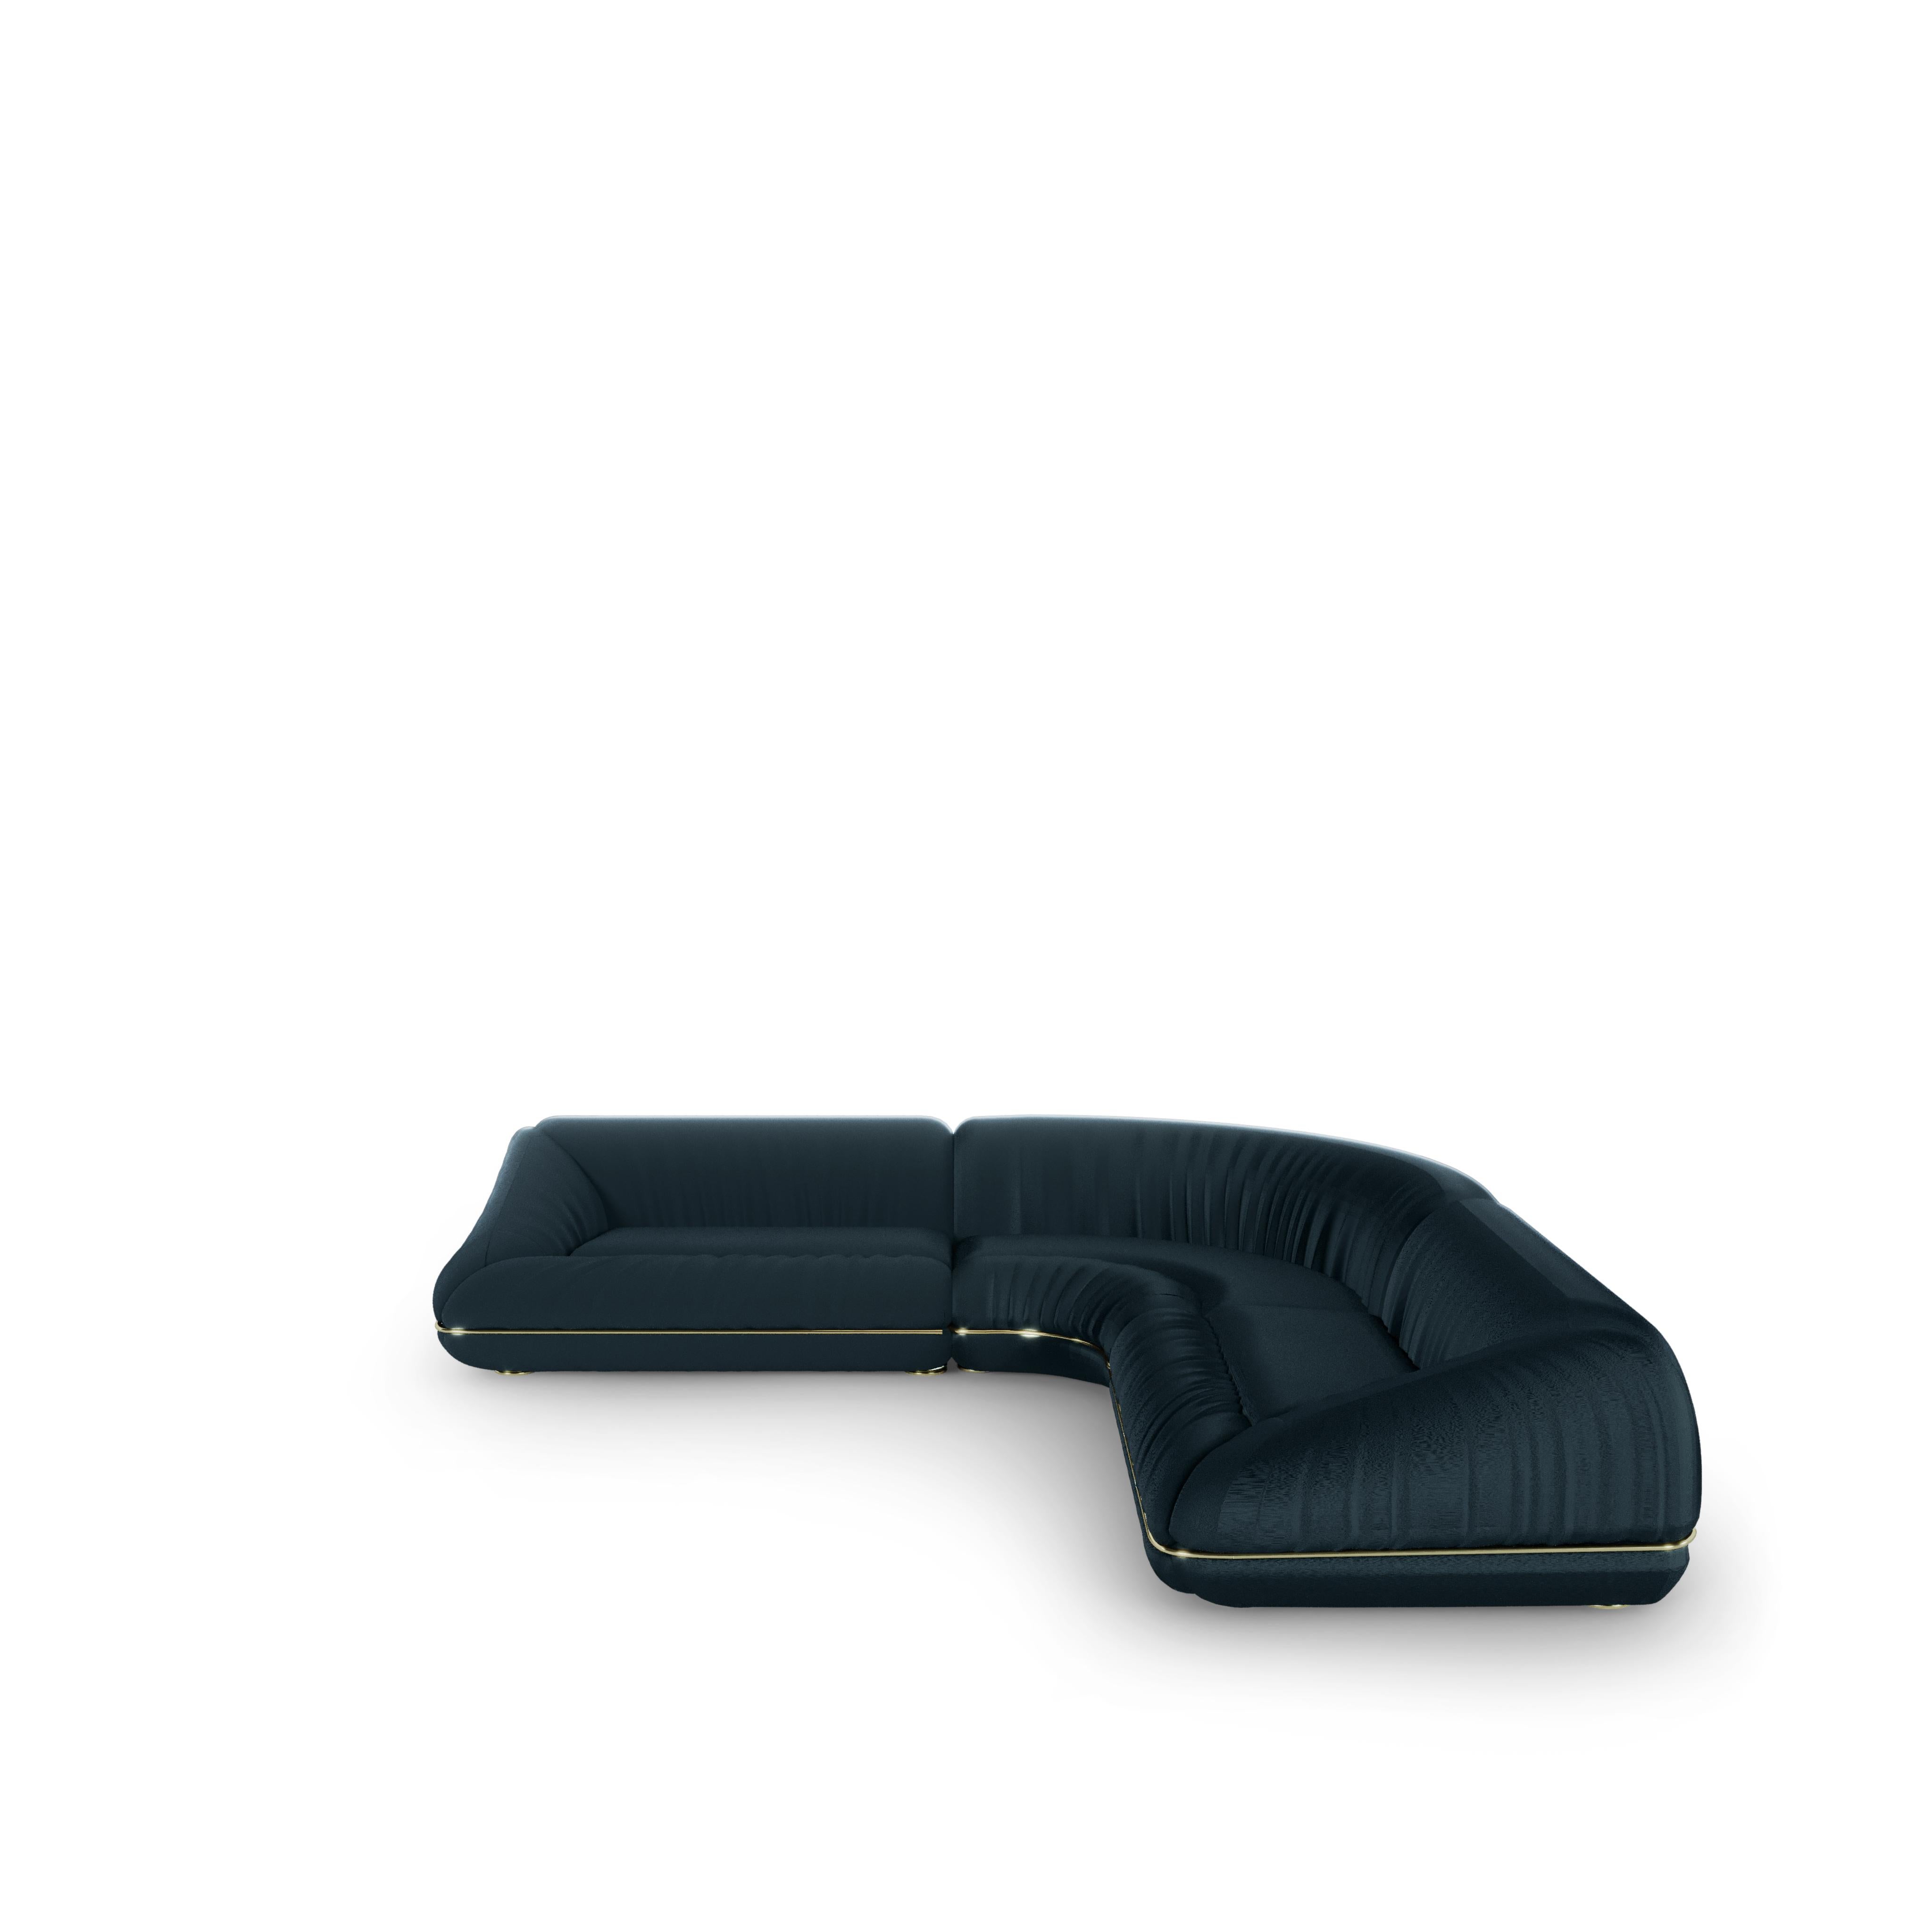 Contemporary Post-Modern Soft Upholstered Xenon U-Shape Lounge Sofa by Draga & Aurel For Sale